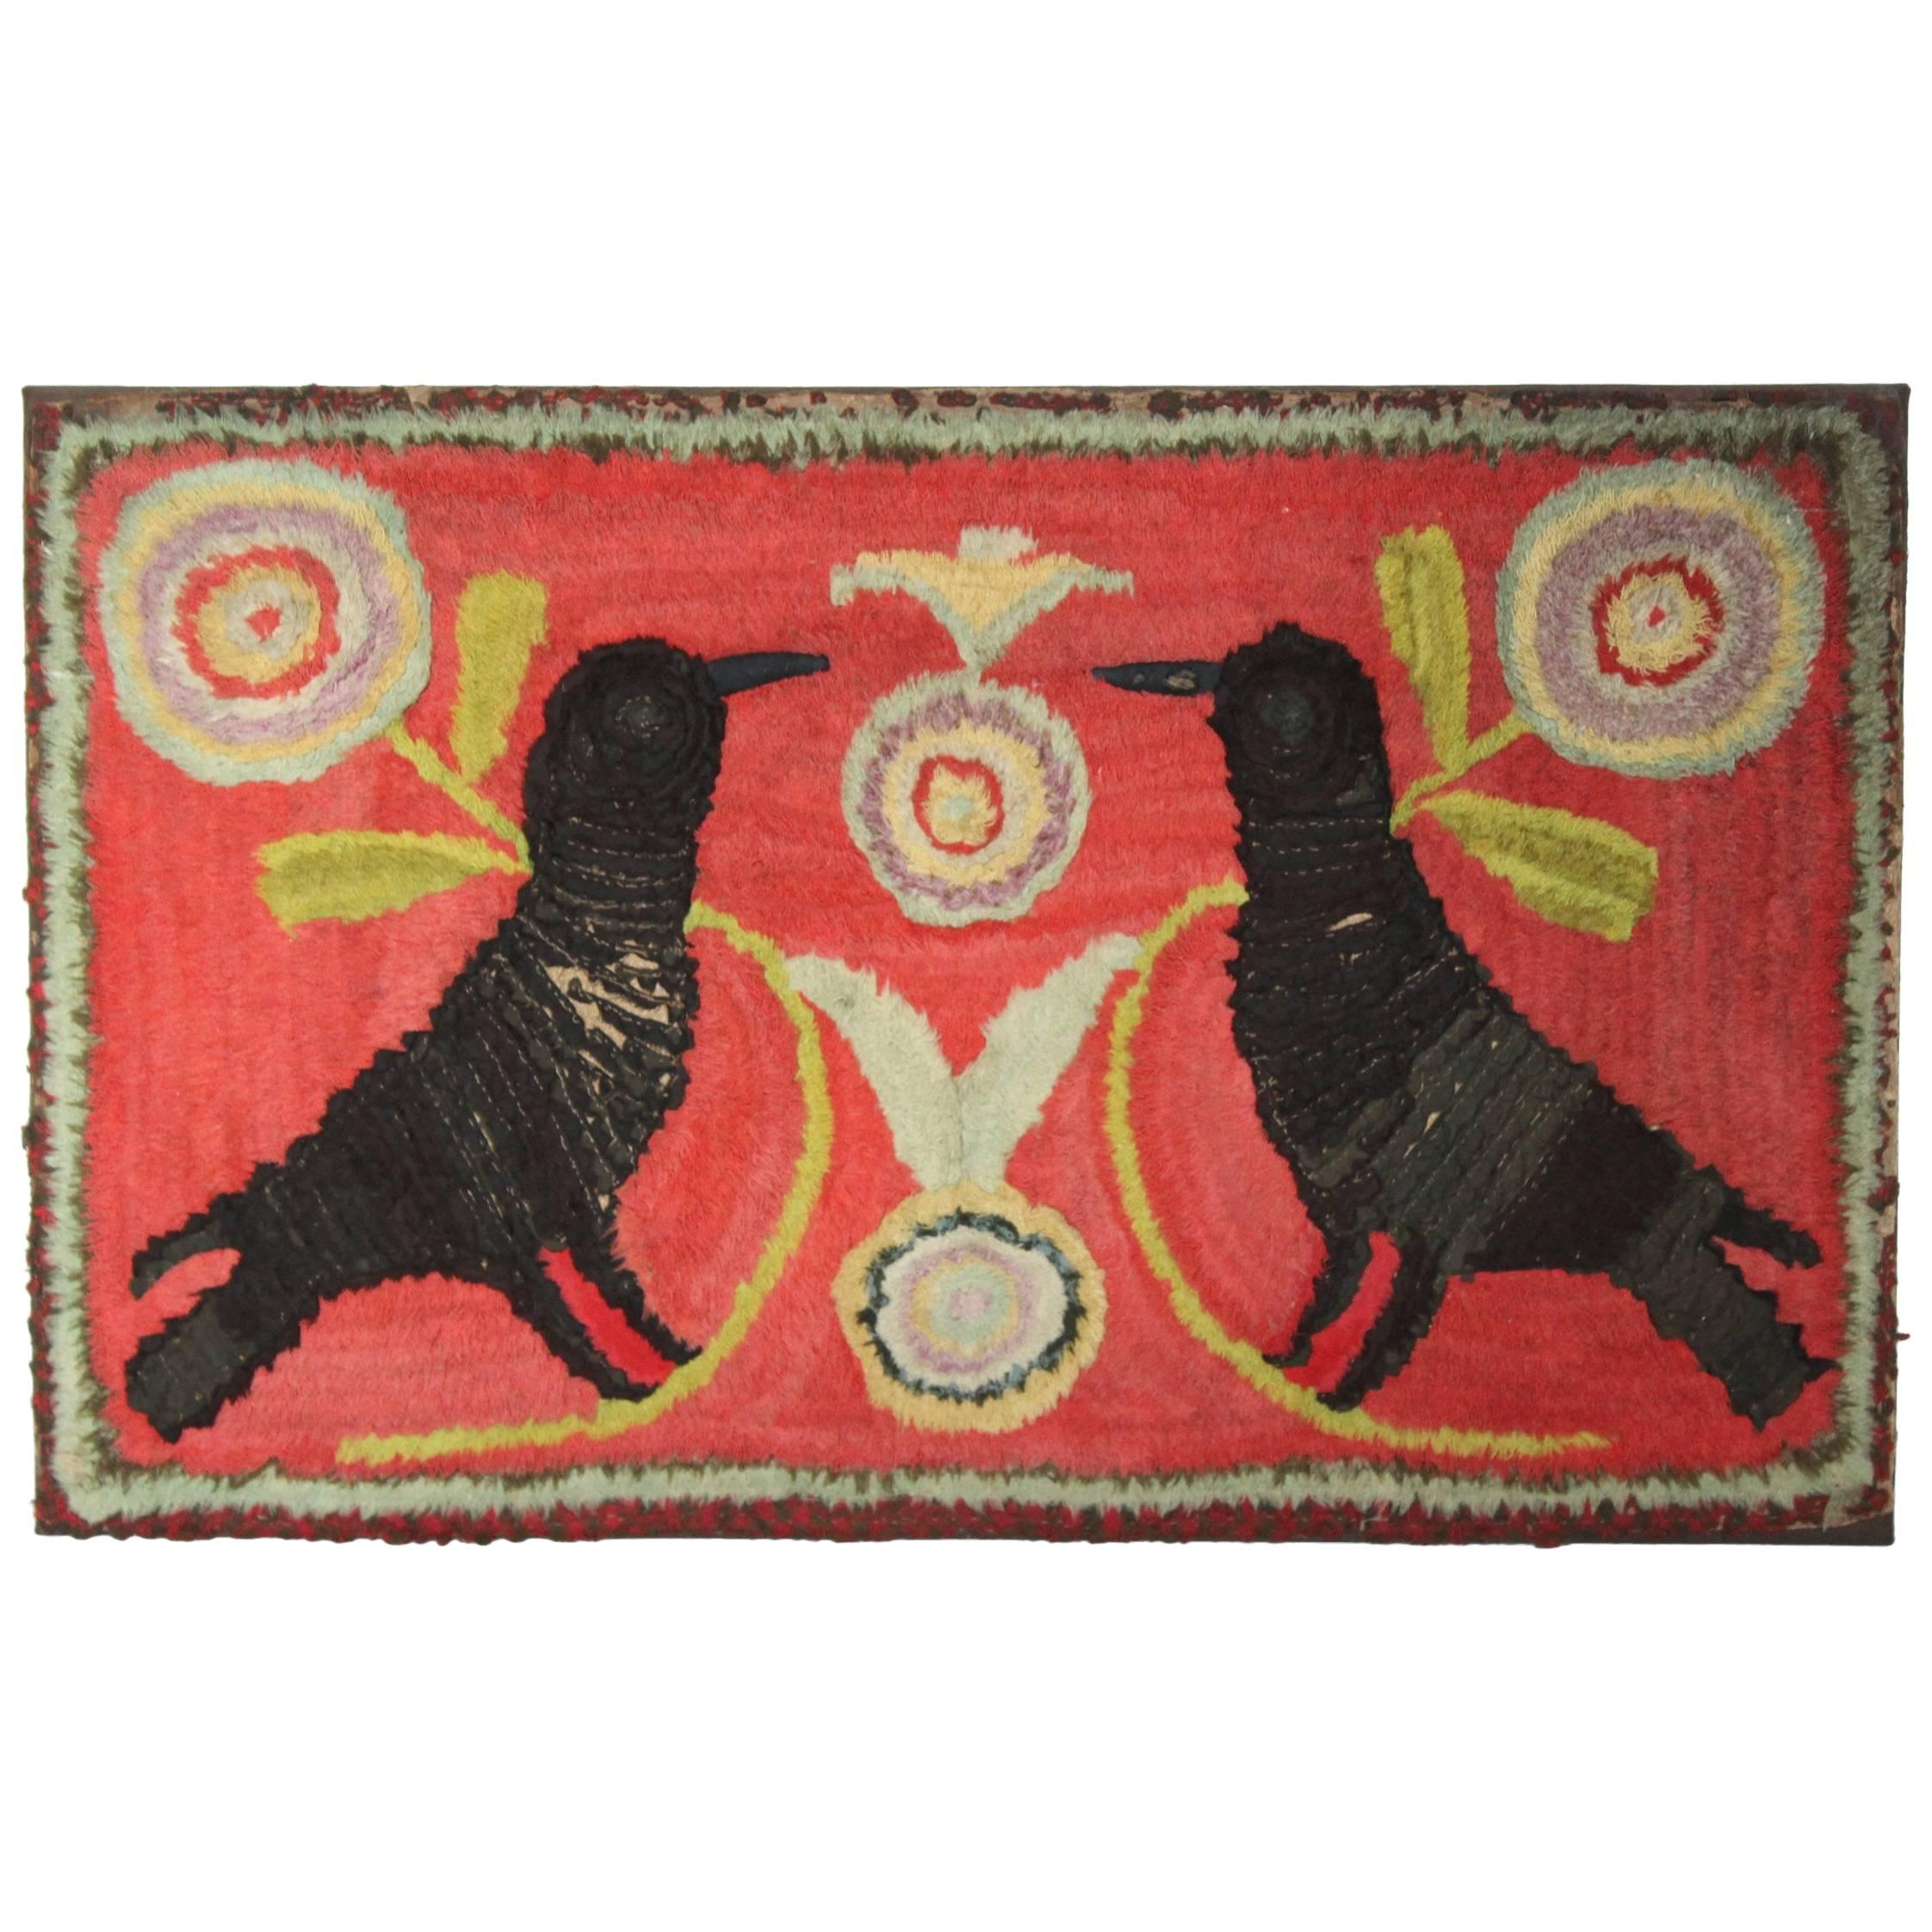 Cotton and Wool Shirred Rug Depicting Two Blackbirds on a Red Ground